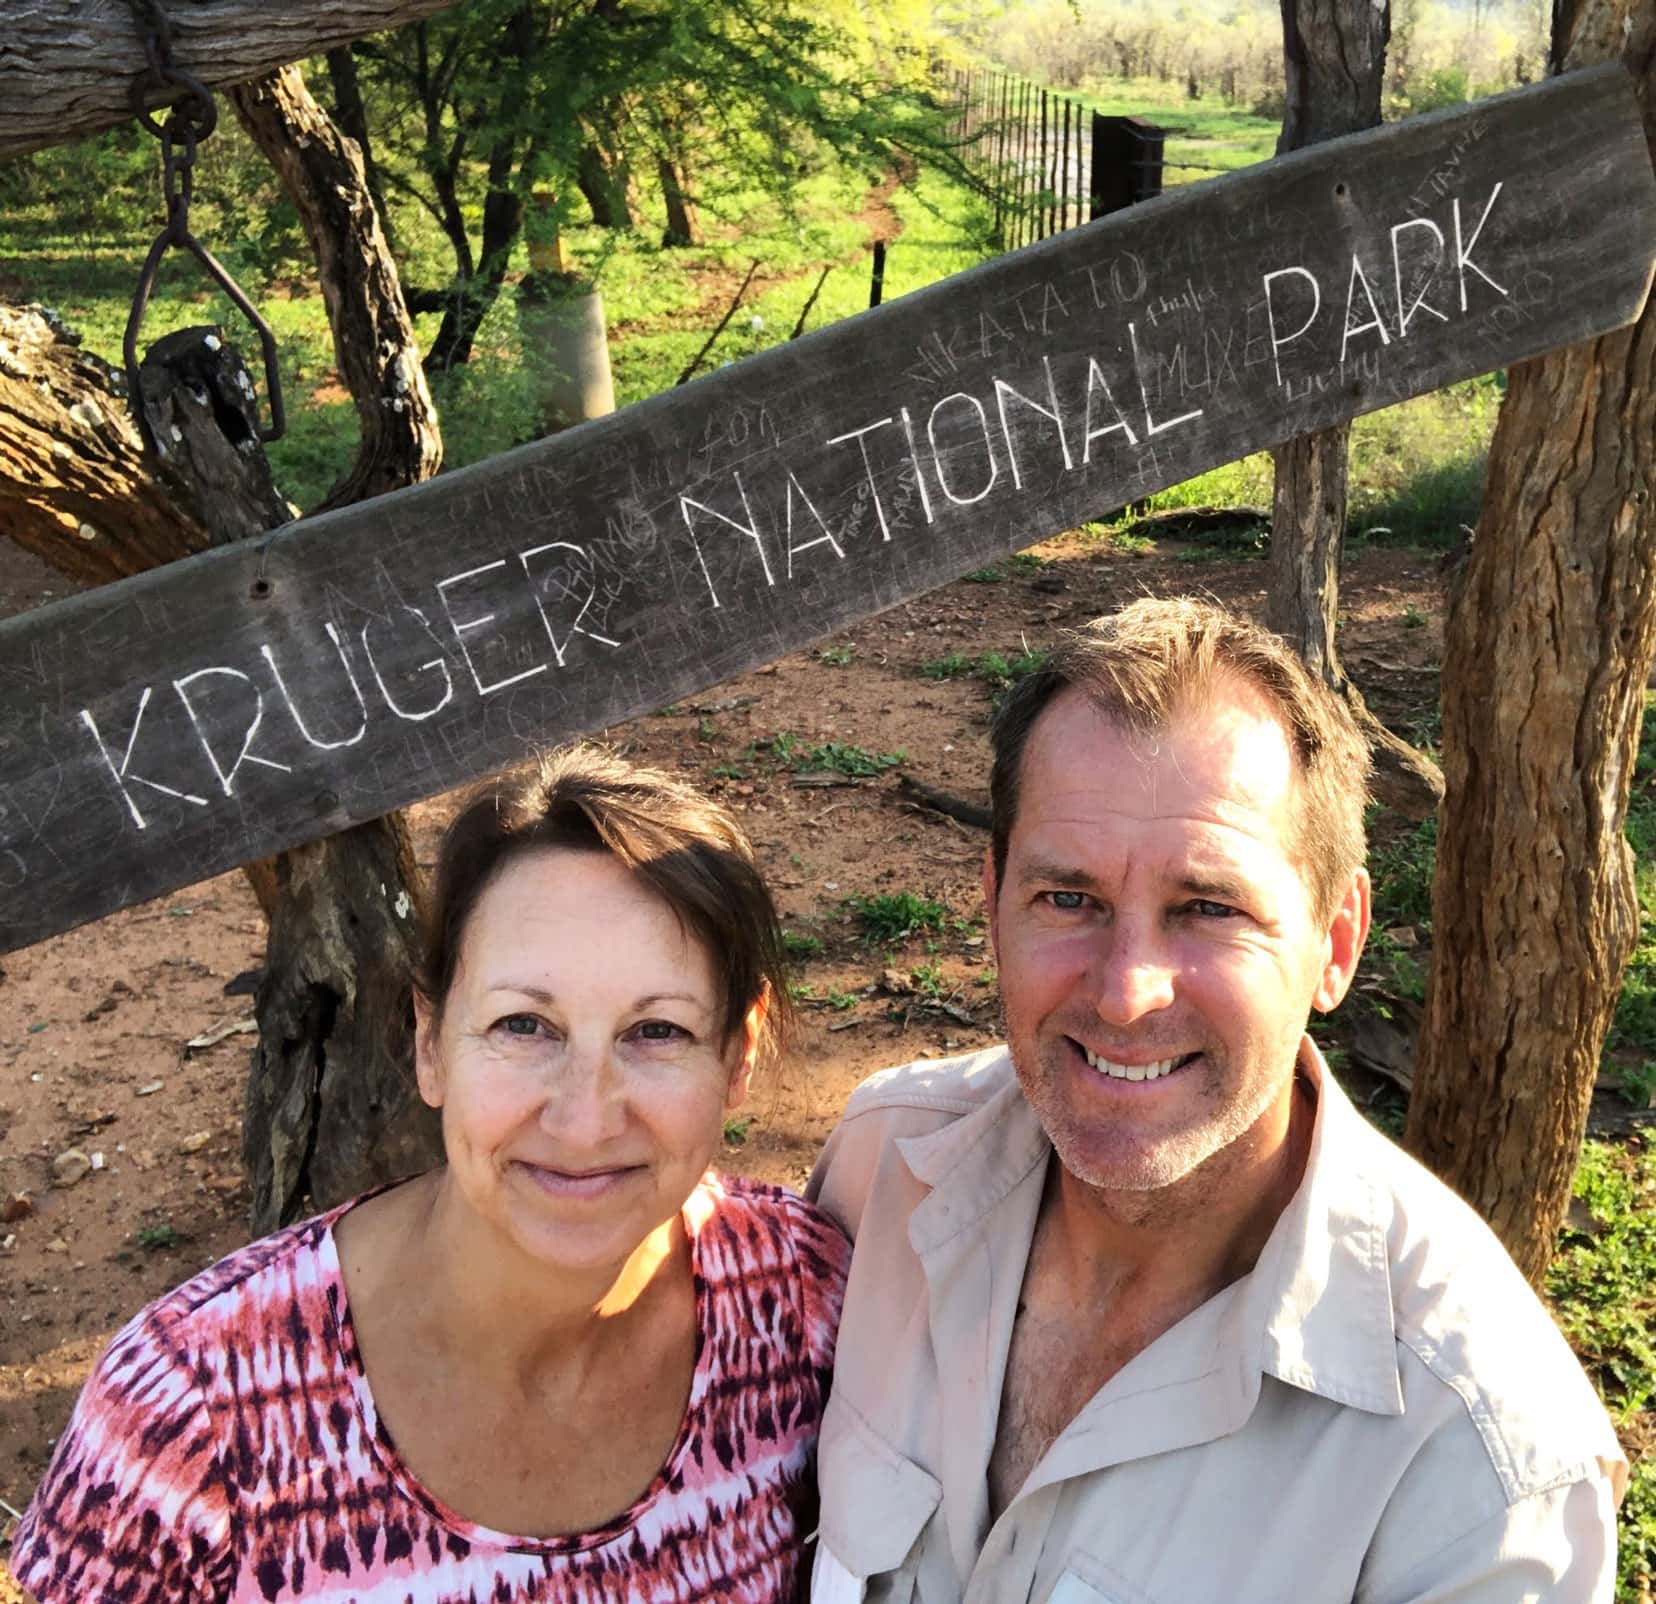 Lars and Shelley stood by the Kruger sign